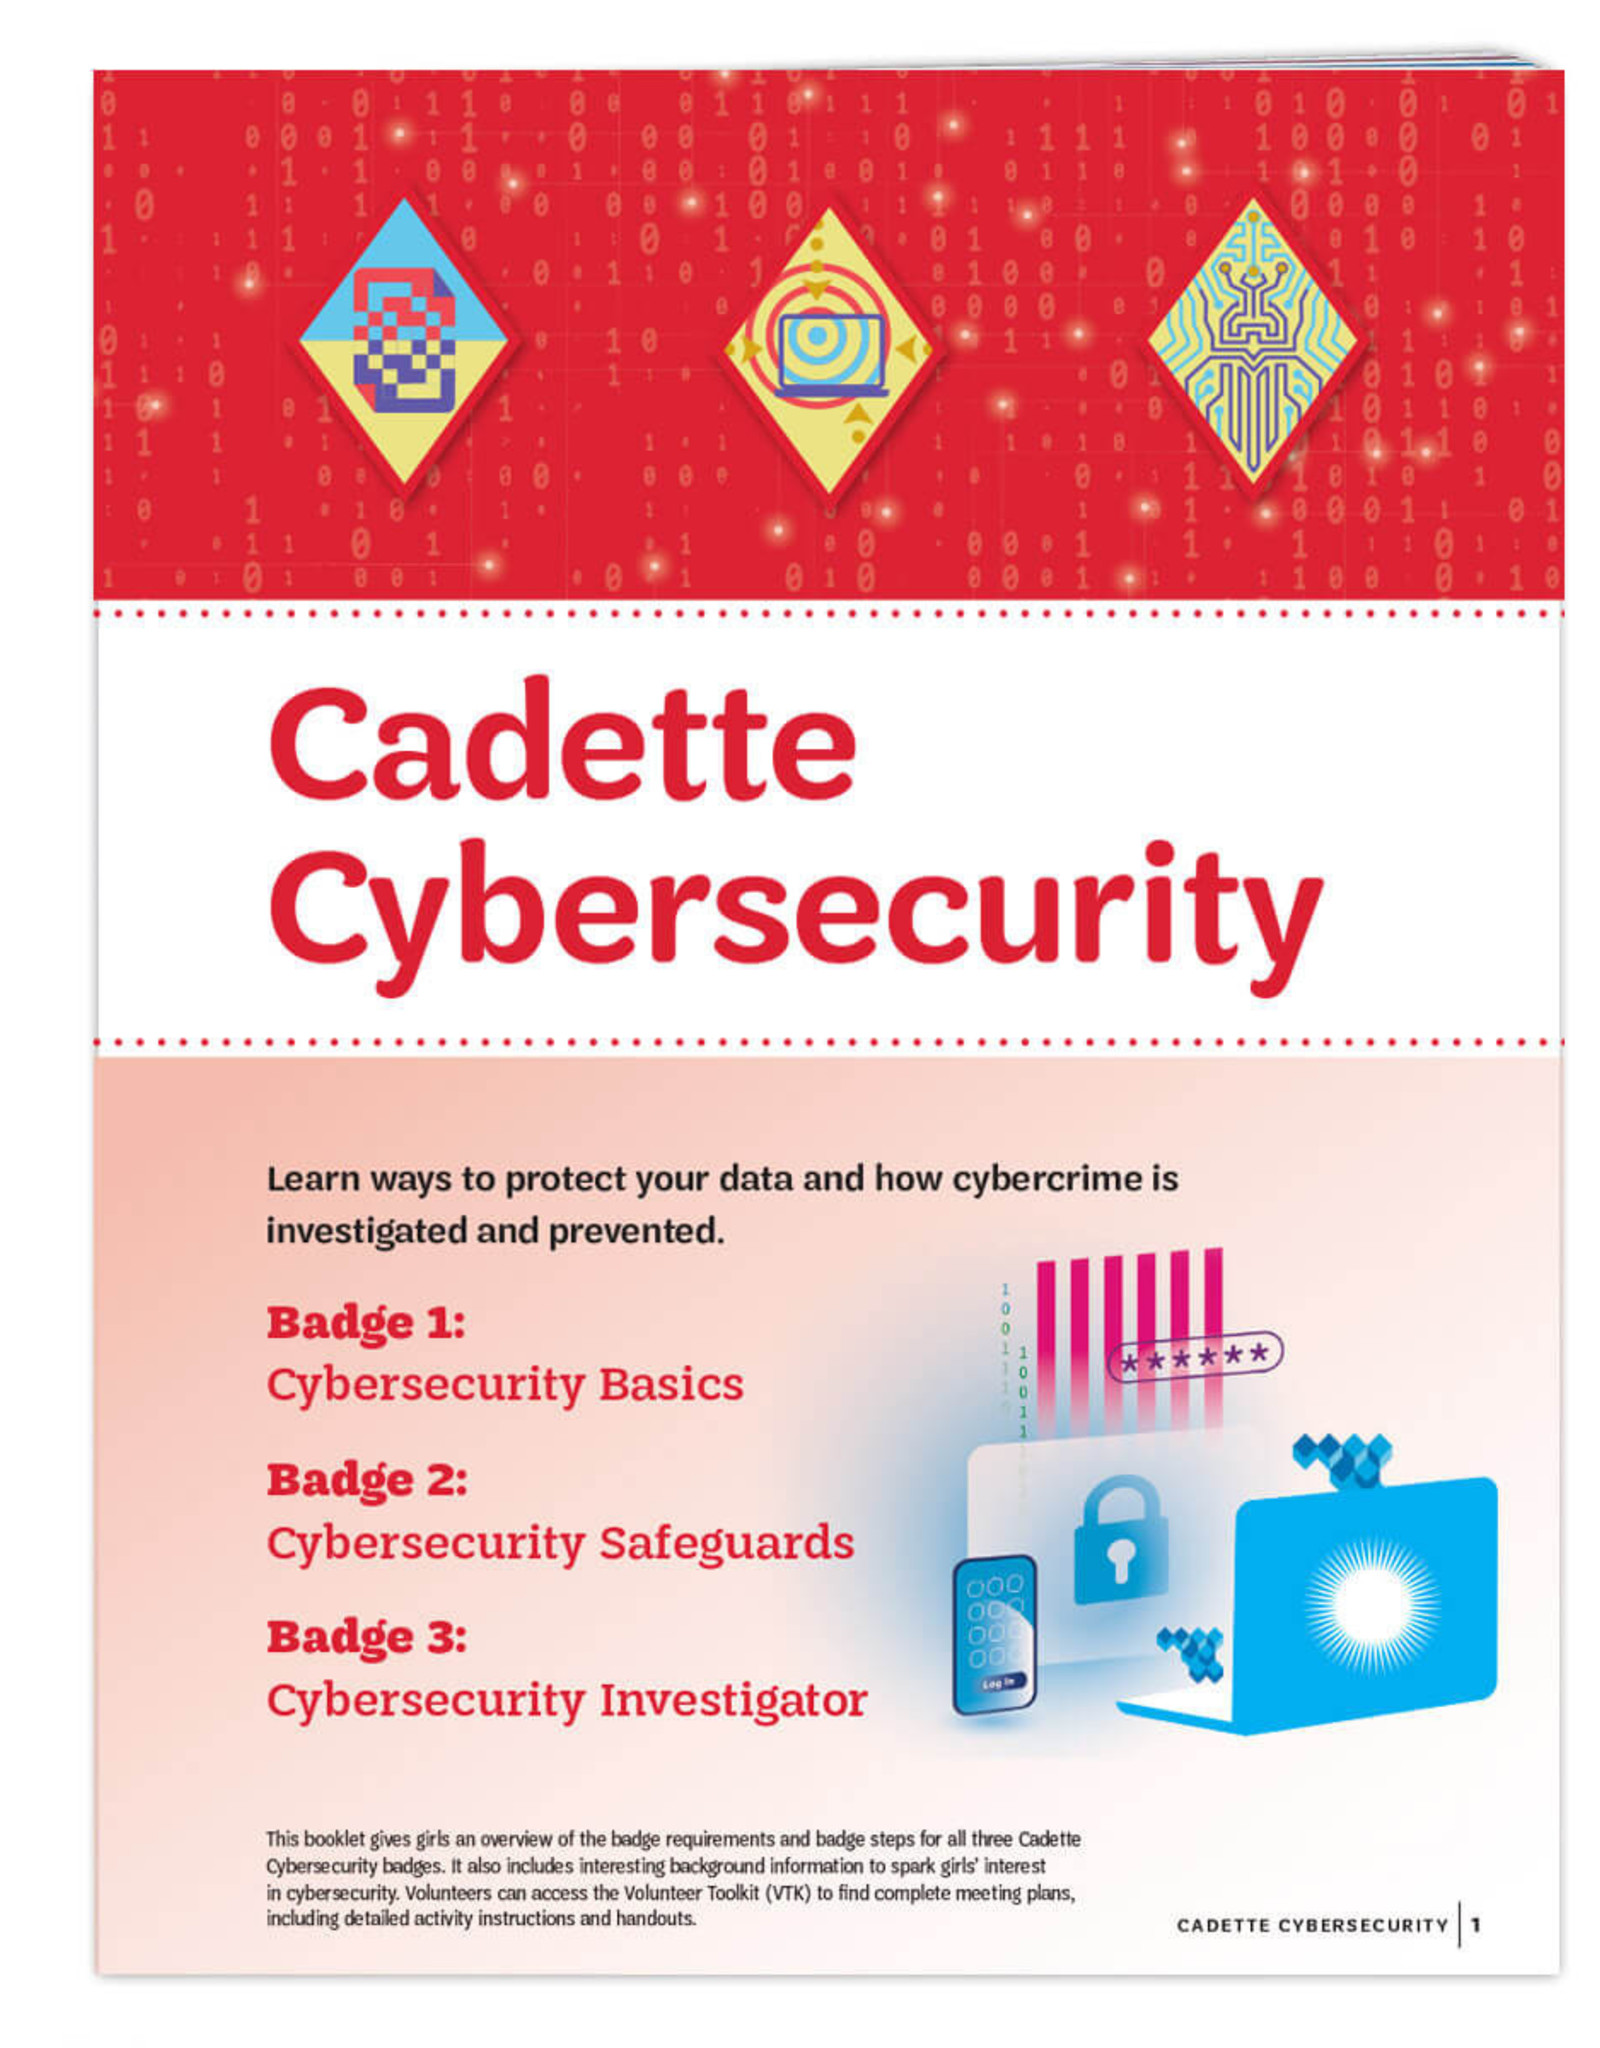 GIRL SCOUTS OF THE USA Cadette Cybersecurity Requirements Pamphlet